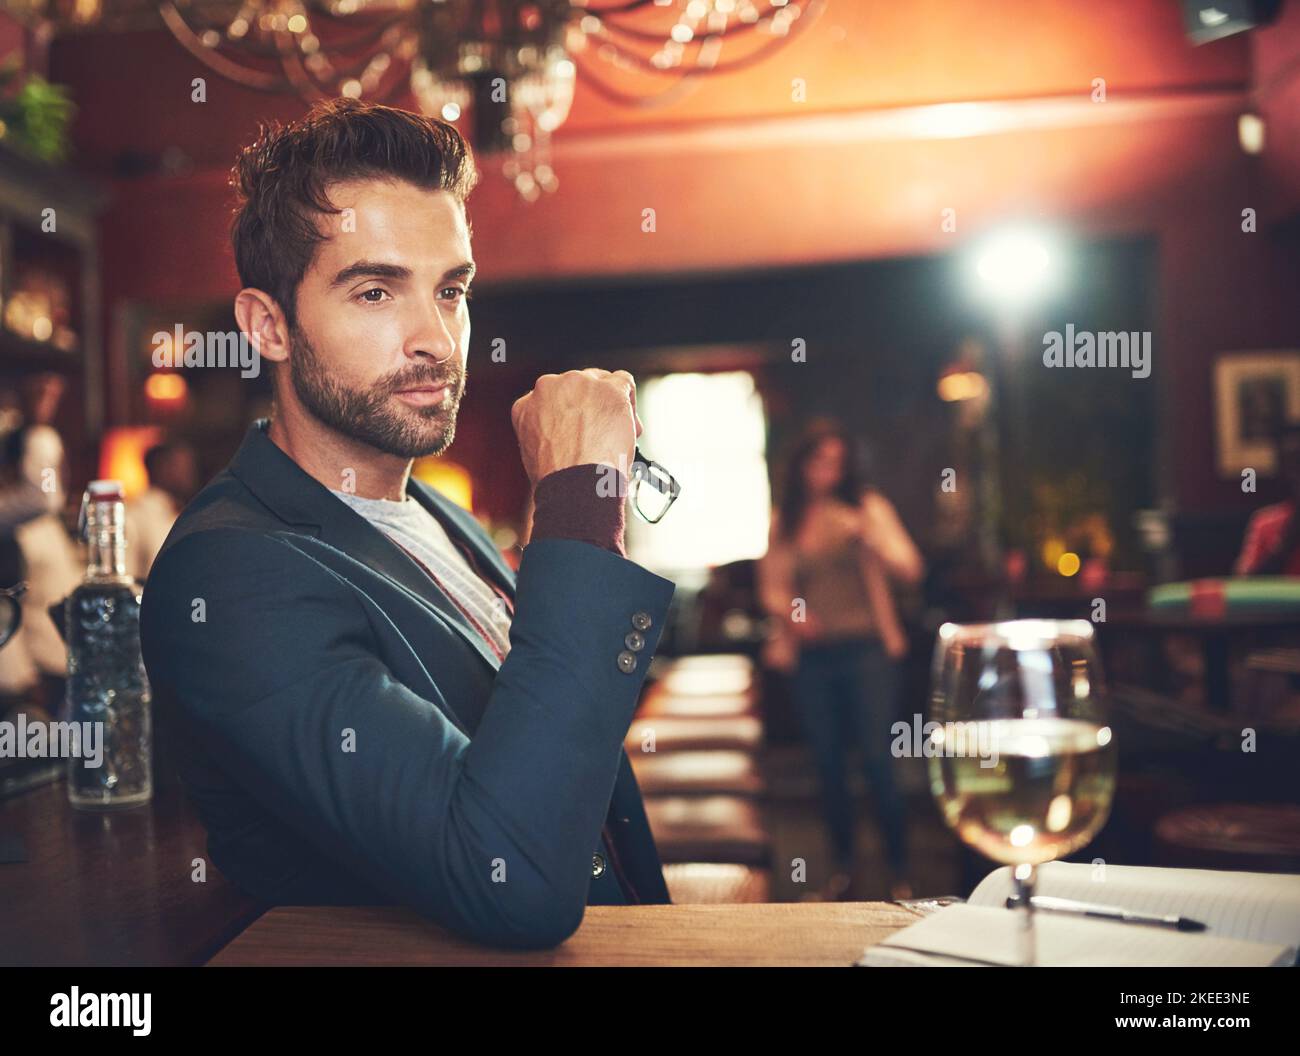 He comes here to think. a young man sitting in a bar. Stock Photo